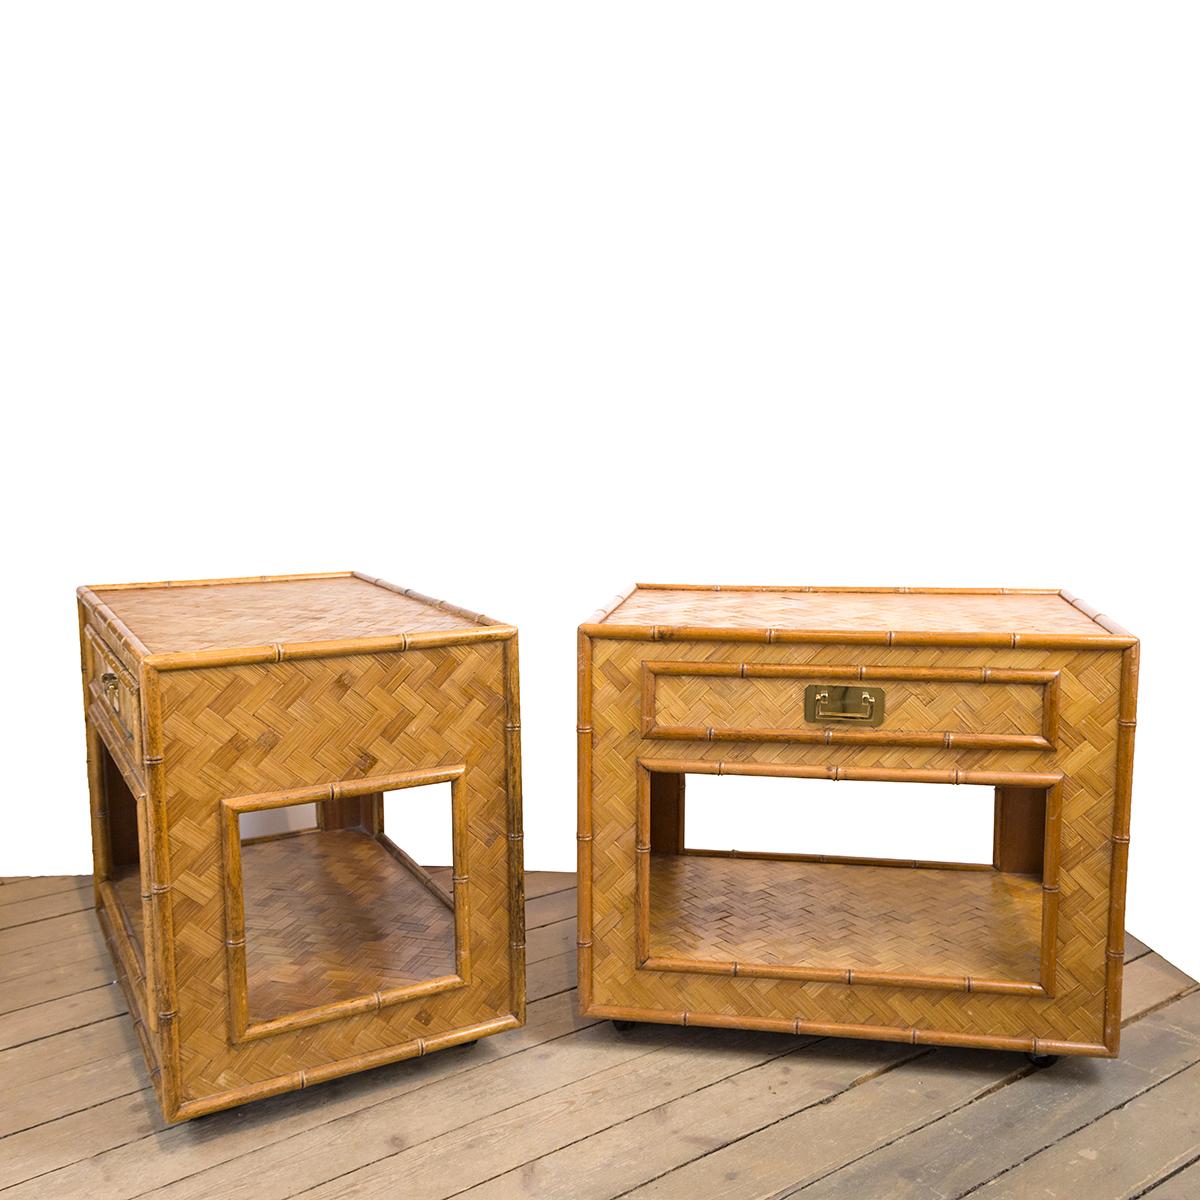 Pair of woven rattan cabinets with single drawer, bottom shelf, brass hardware and
casters.